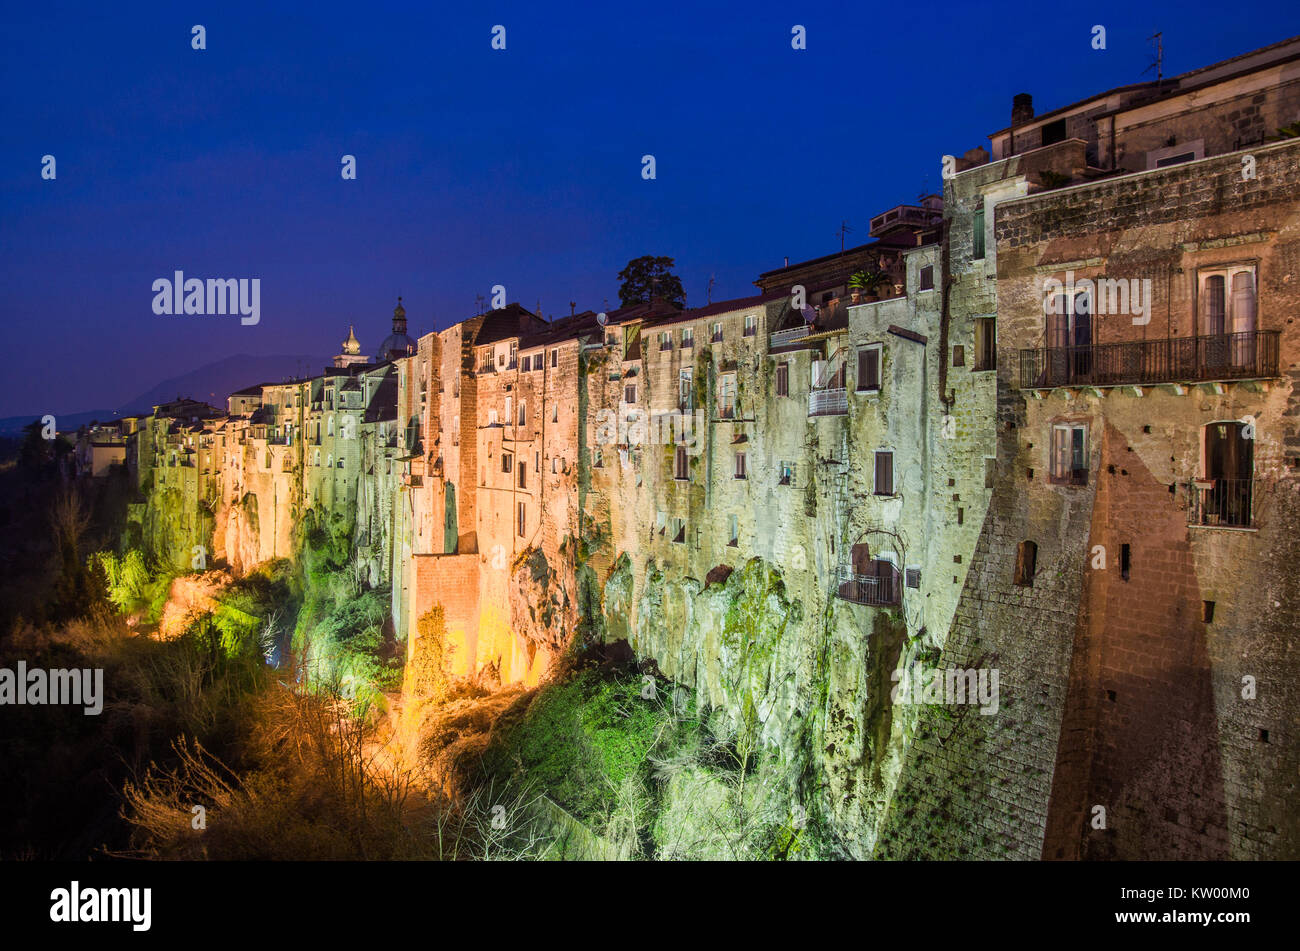 A view of historical small town of Sant Agata de Goti at night with street lights and houses on the cliff. Stock Photo